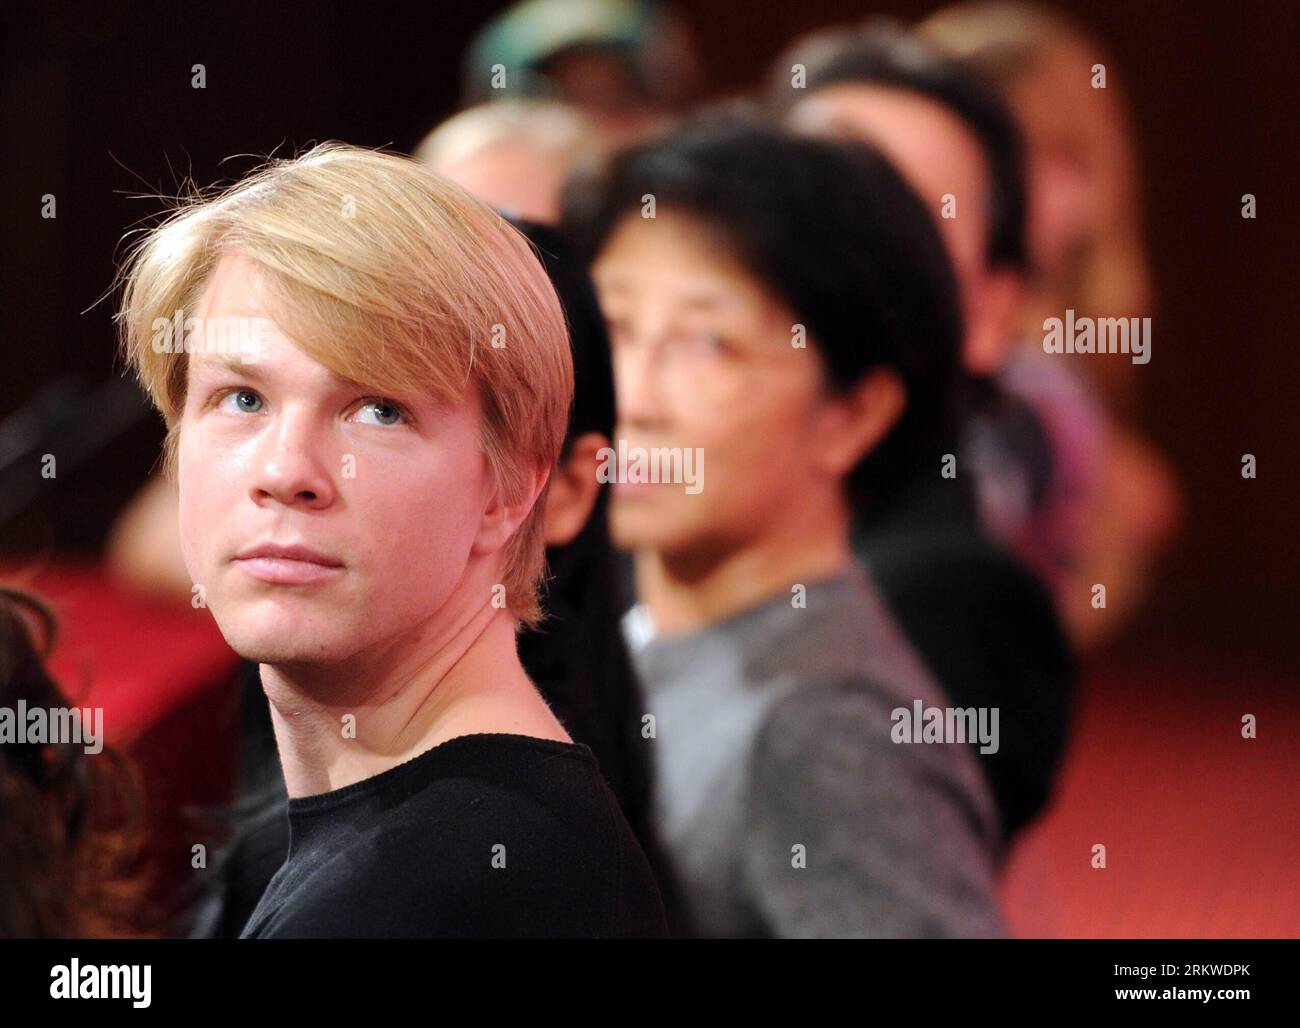 Bildnummer: 58671084  Datum: 06.11.2012  Copyright: imago/Xinhua (121106) -- BEIJING, Nov. 6, 2012 (Xinhua) -- German actor Marijn Rademaker watches a video during a press conference of the stage drama The Lady of The Camallias in Beijing, capital of China, Nov. 6, 2012. The stage drama, which is performed by the Stuttgart Ballet of Germany, will be put on stage from Nov. 8 to Nov. 10 at the National Centre for the Performing Arts. (Xinhua/Luo Xiaoguang) (wjq) CHINA-BEIJING-STAGE DRAMA-THE LADY OF THE CAMALLIAS (CN) PUBLICATIONxNOTxINxCHN People Kultur Tanz Ballet Camellias Die Kameliendame Pr Stock Photo